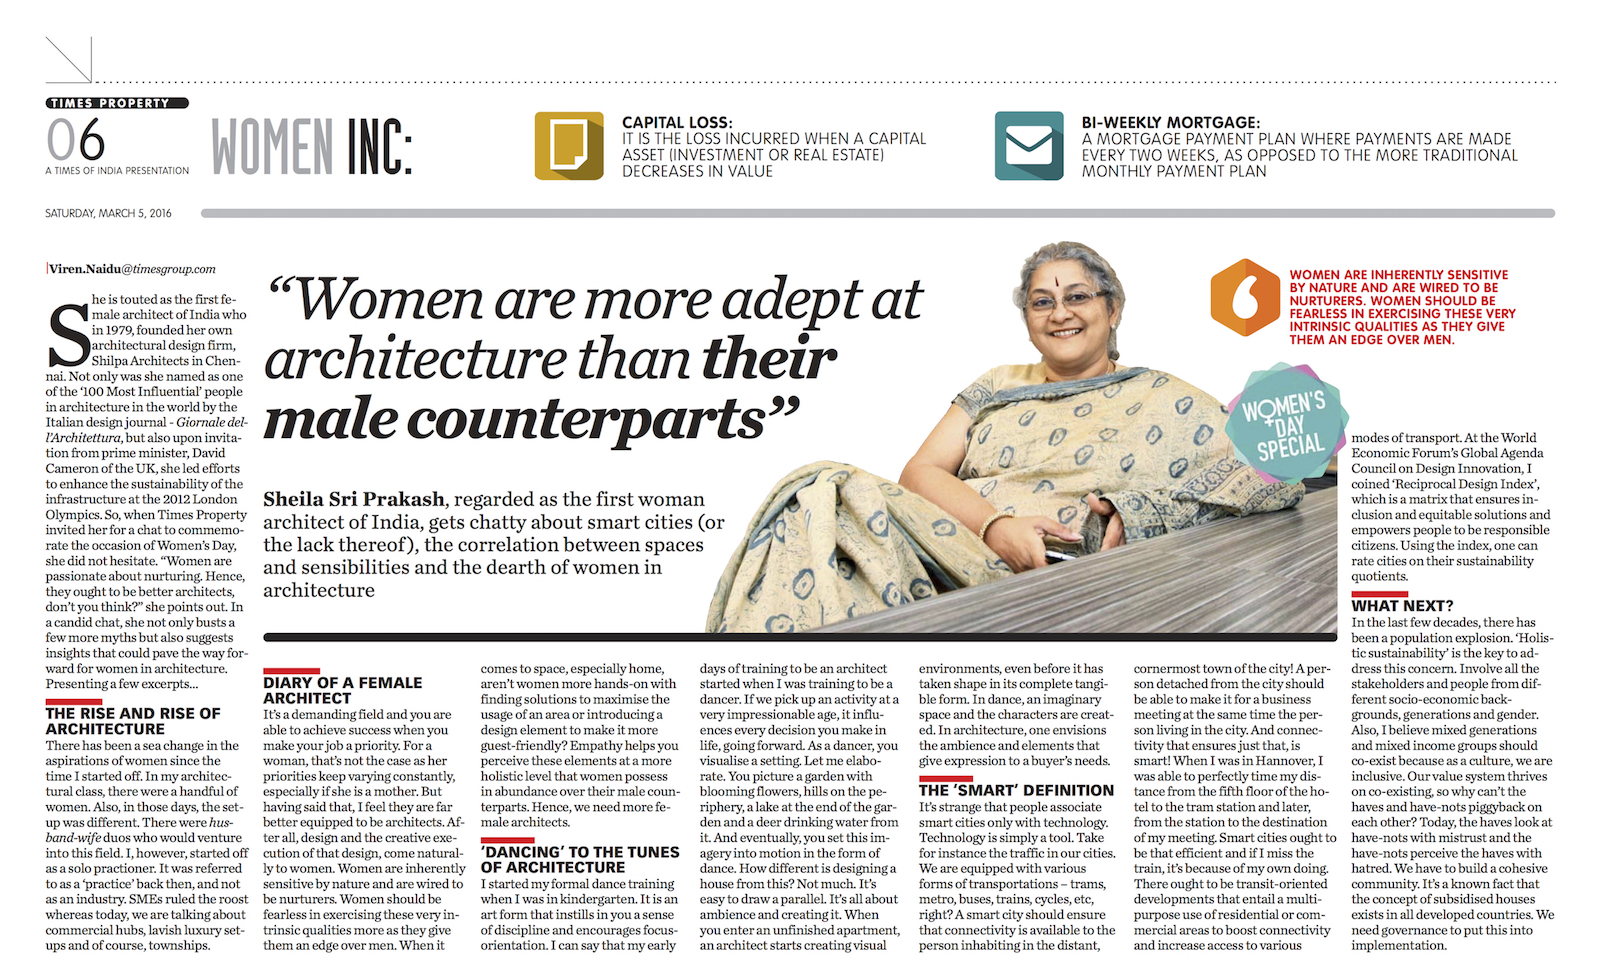 TIMES OF INDIA FEATURES SHEILA SRI PRAKASH ON WOMENS DAY